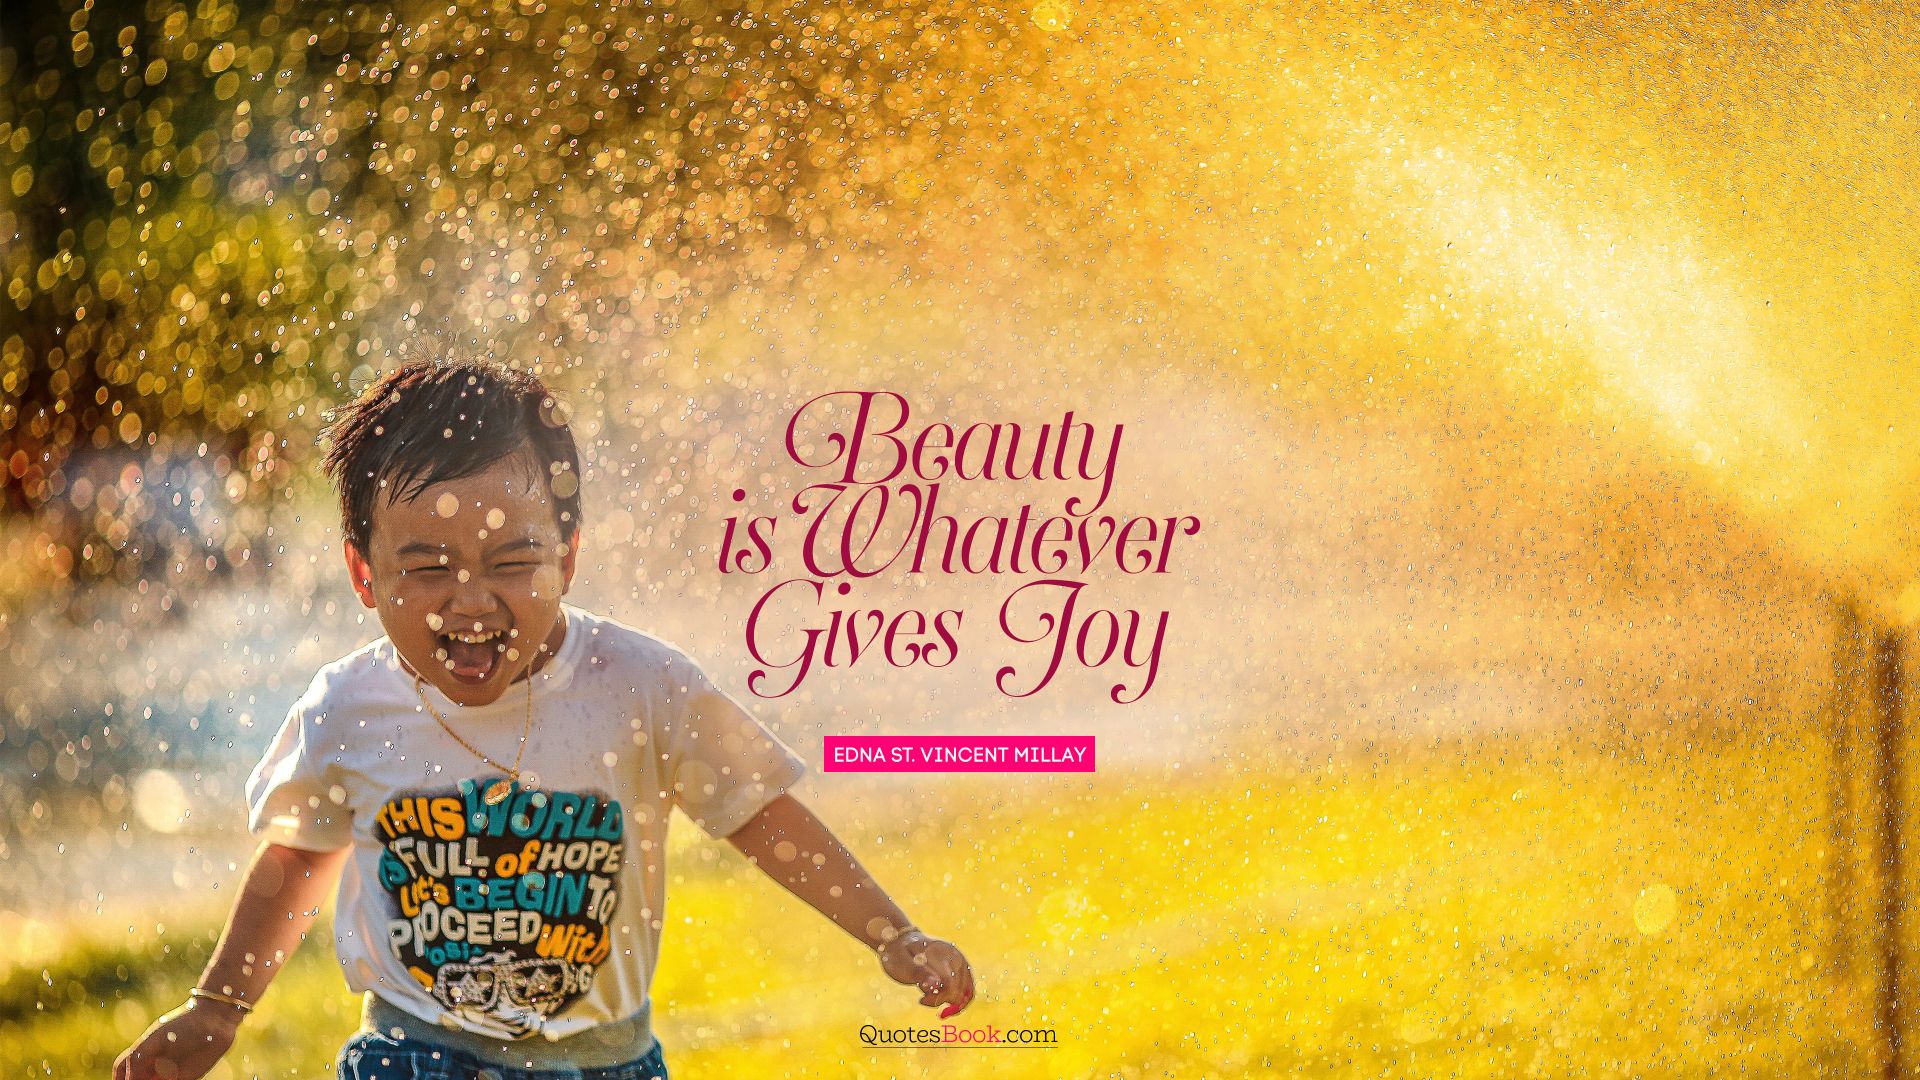 Beauty is whatever gives joy. - Quote by Edna St. Vincent Millay